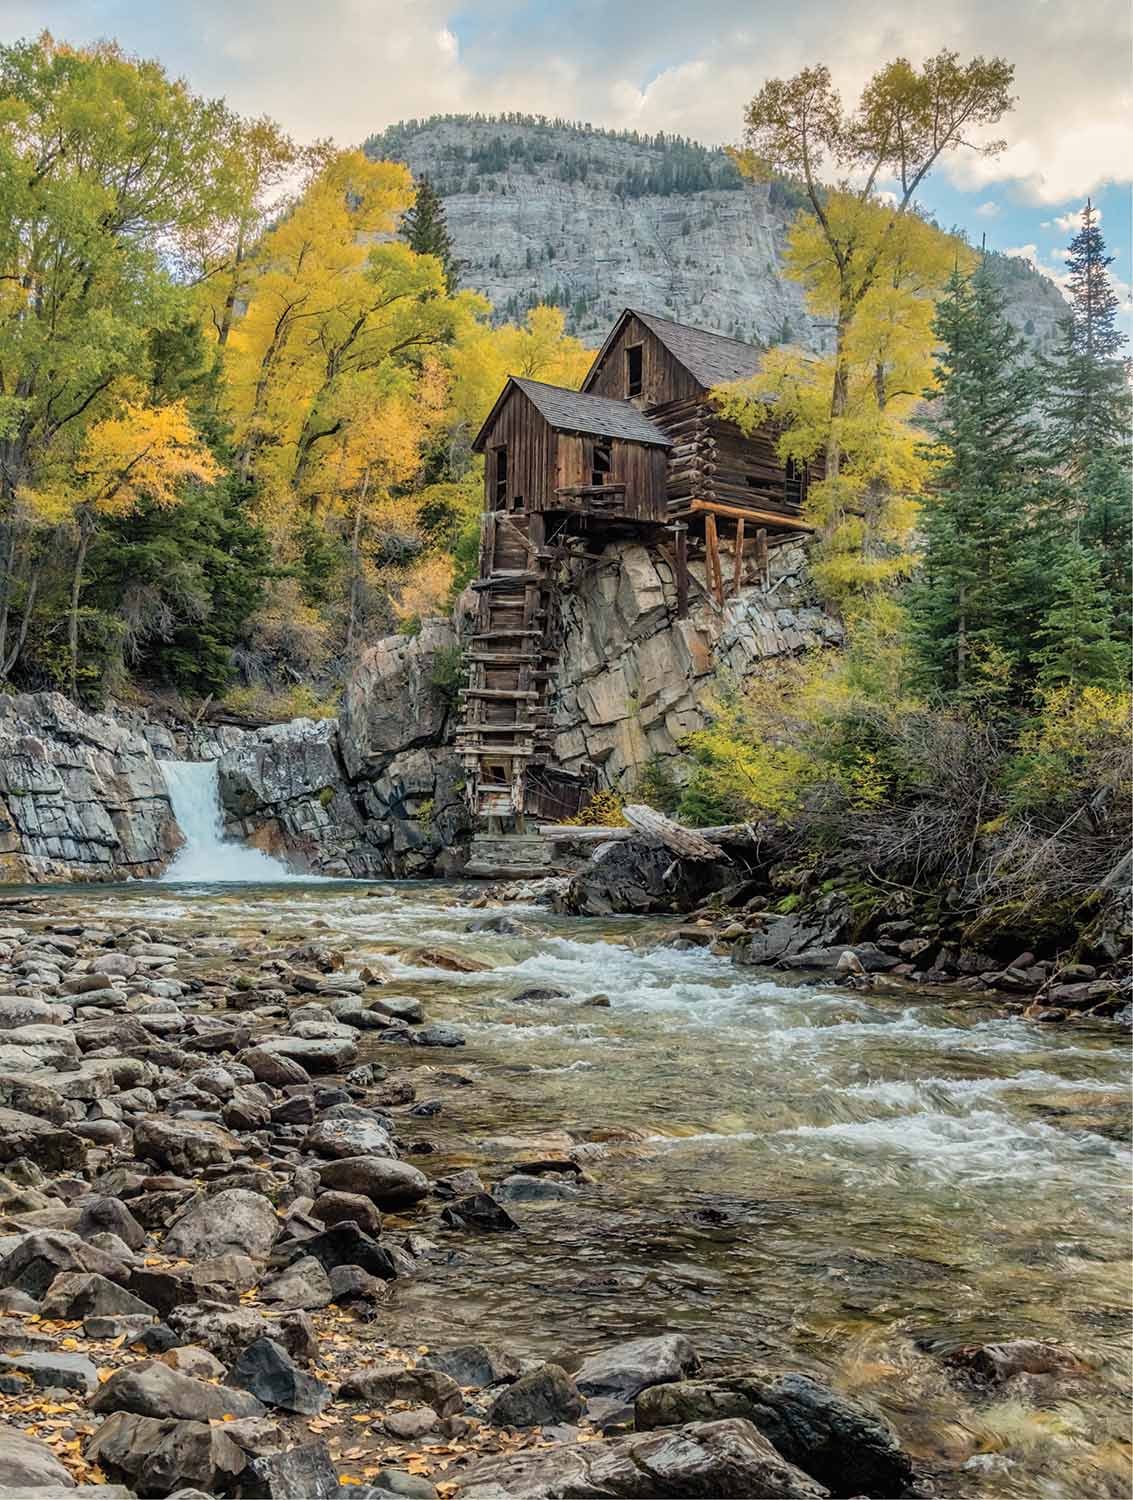 Crystal Mill  Landscape Jigsaw Puzzle